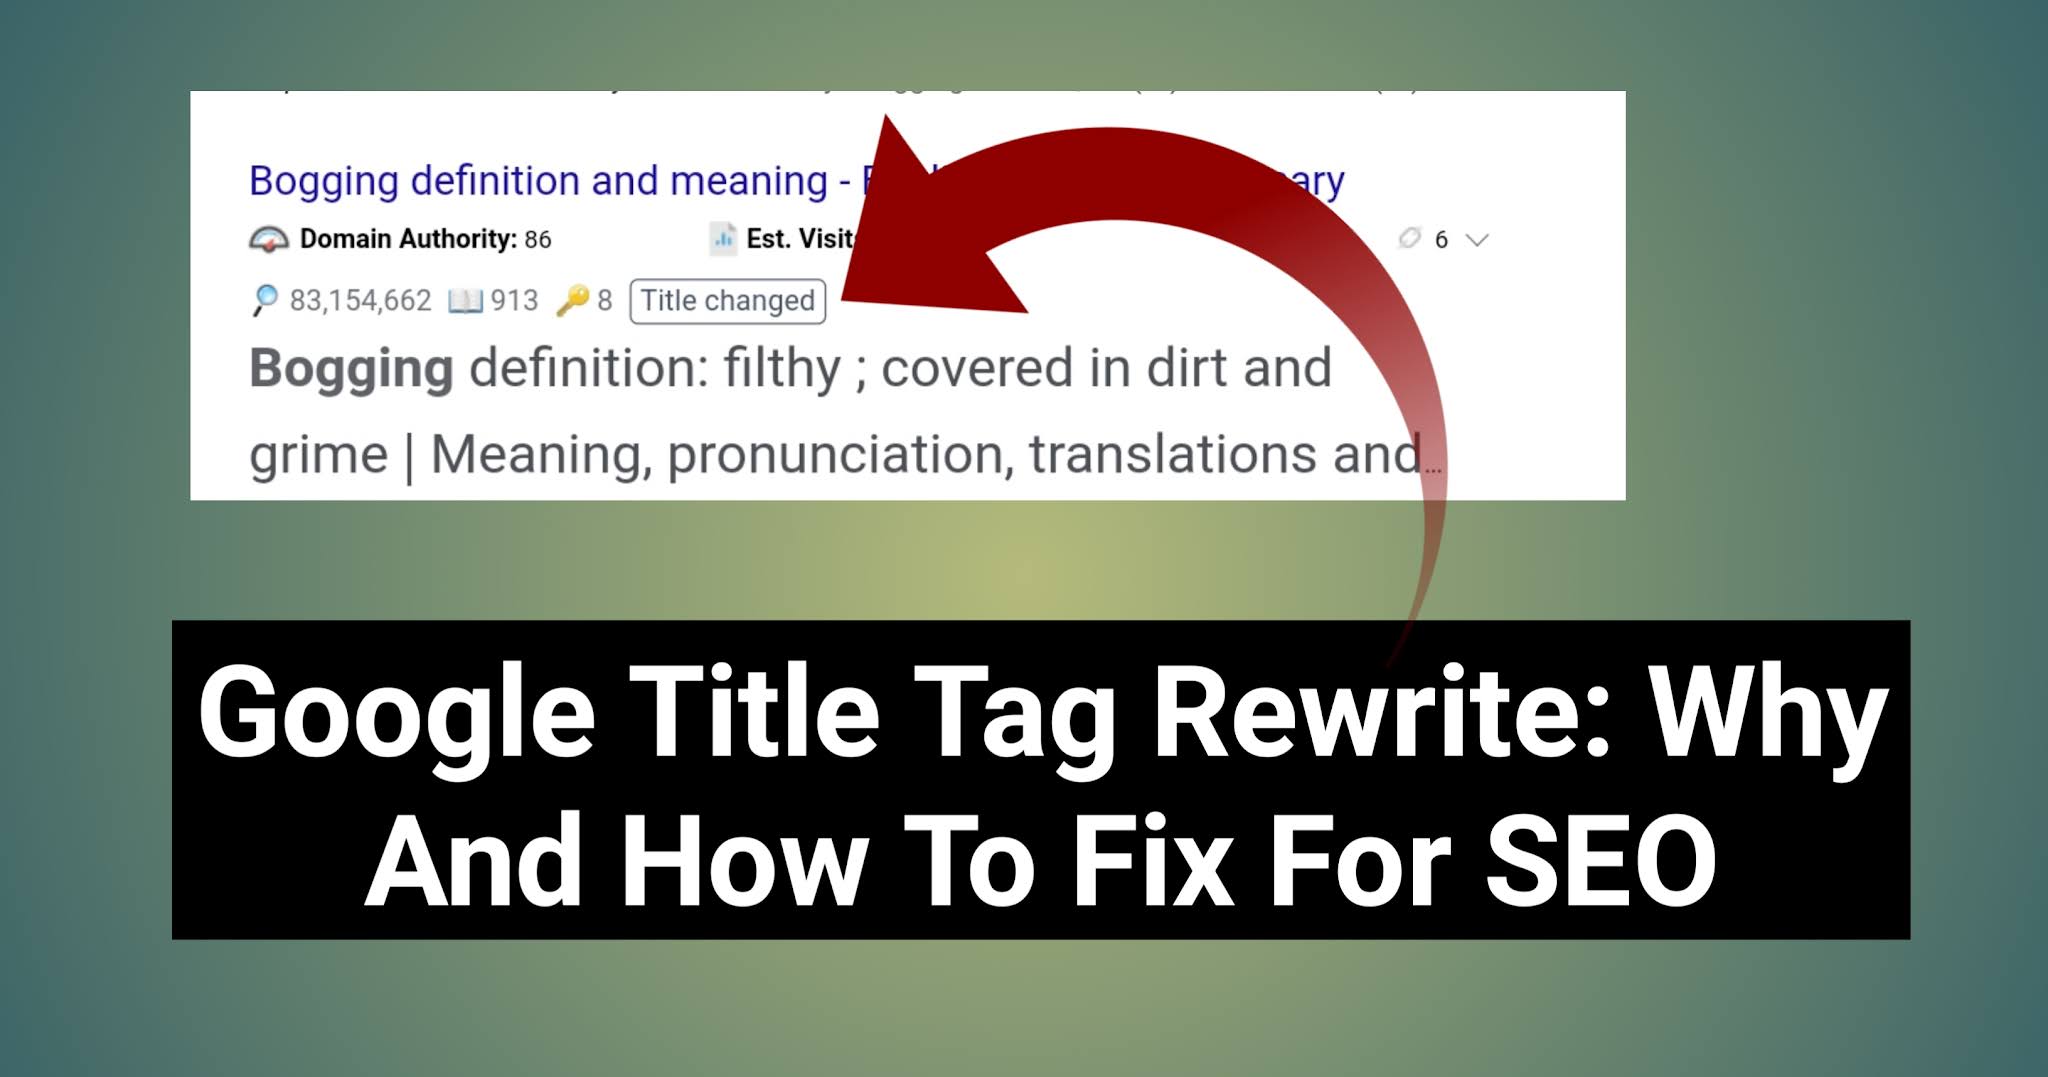 Google Title Tag Rewrite: Why And How To Fix For SEO